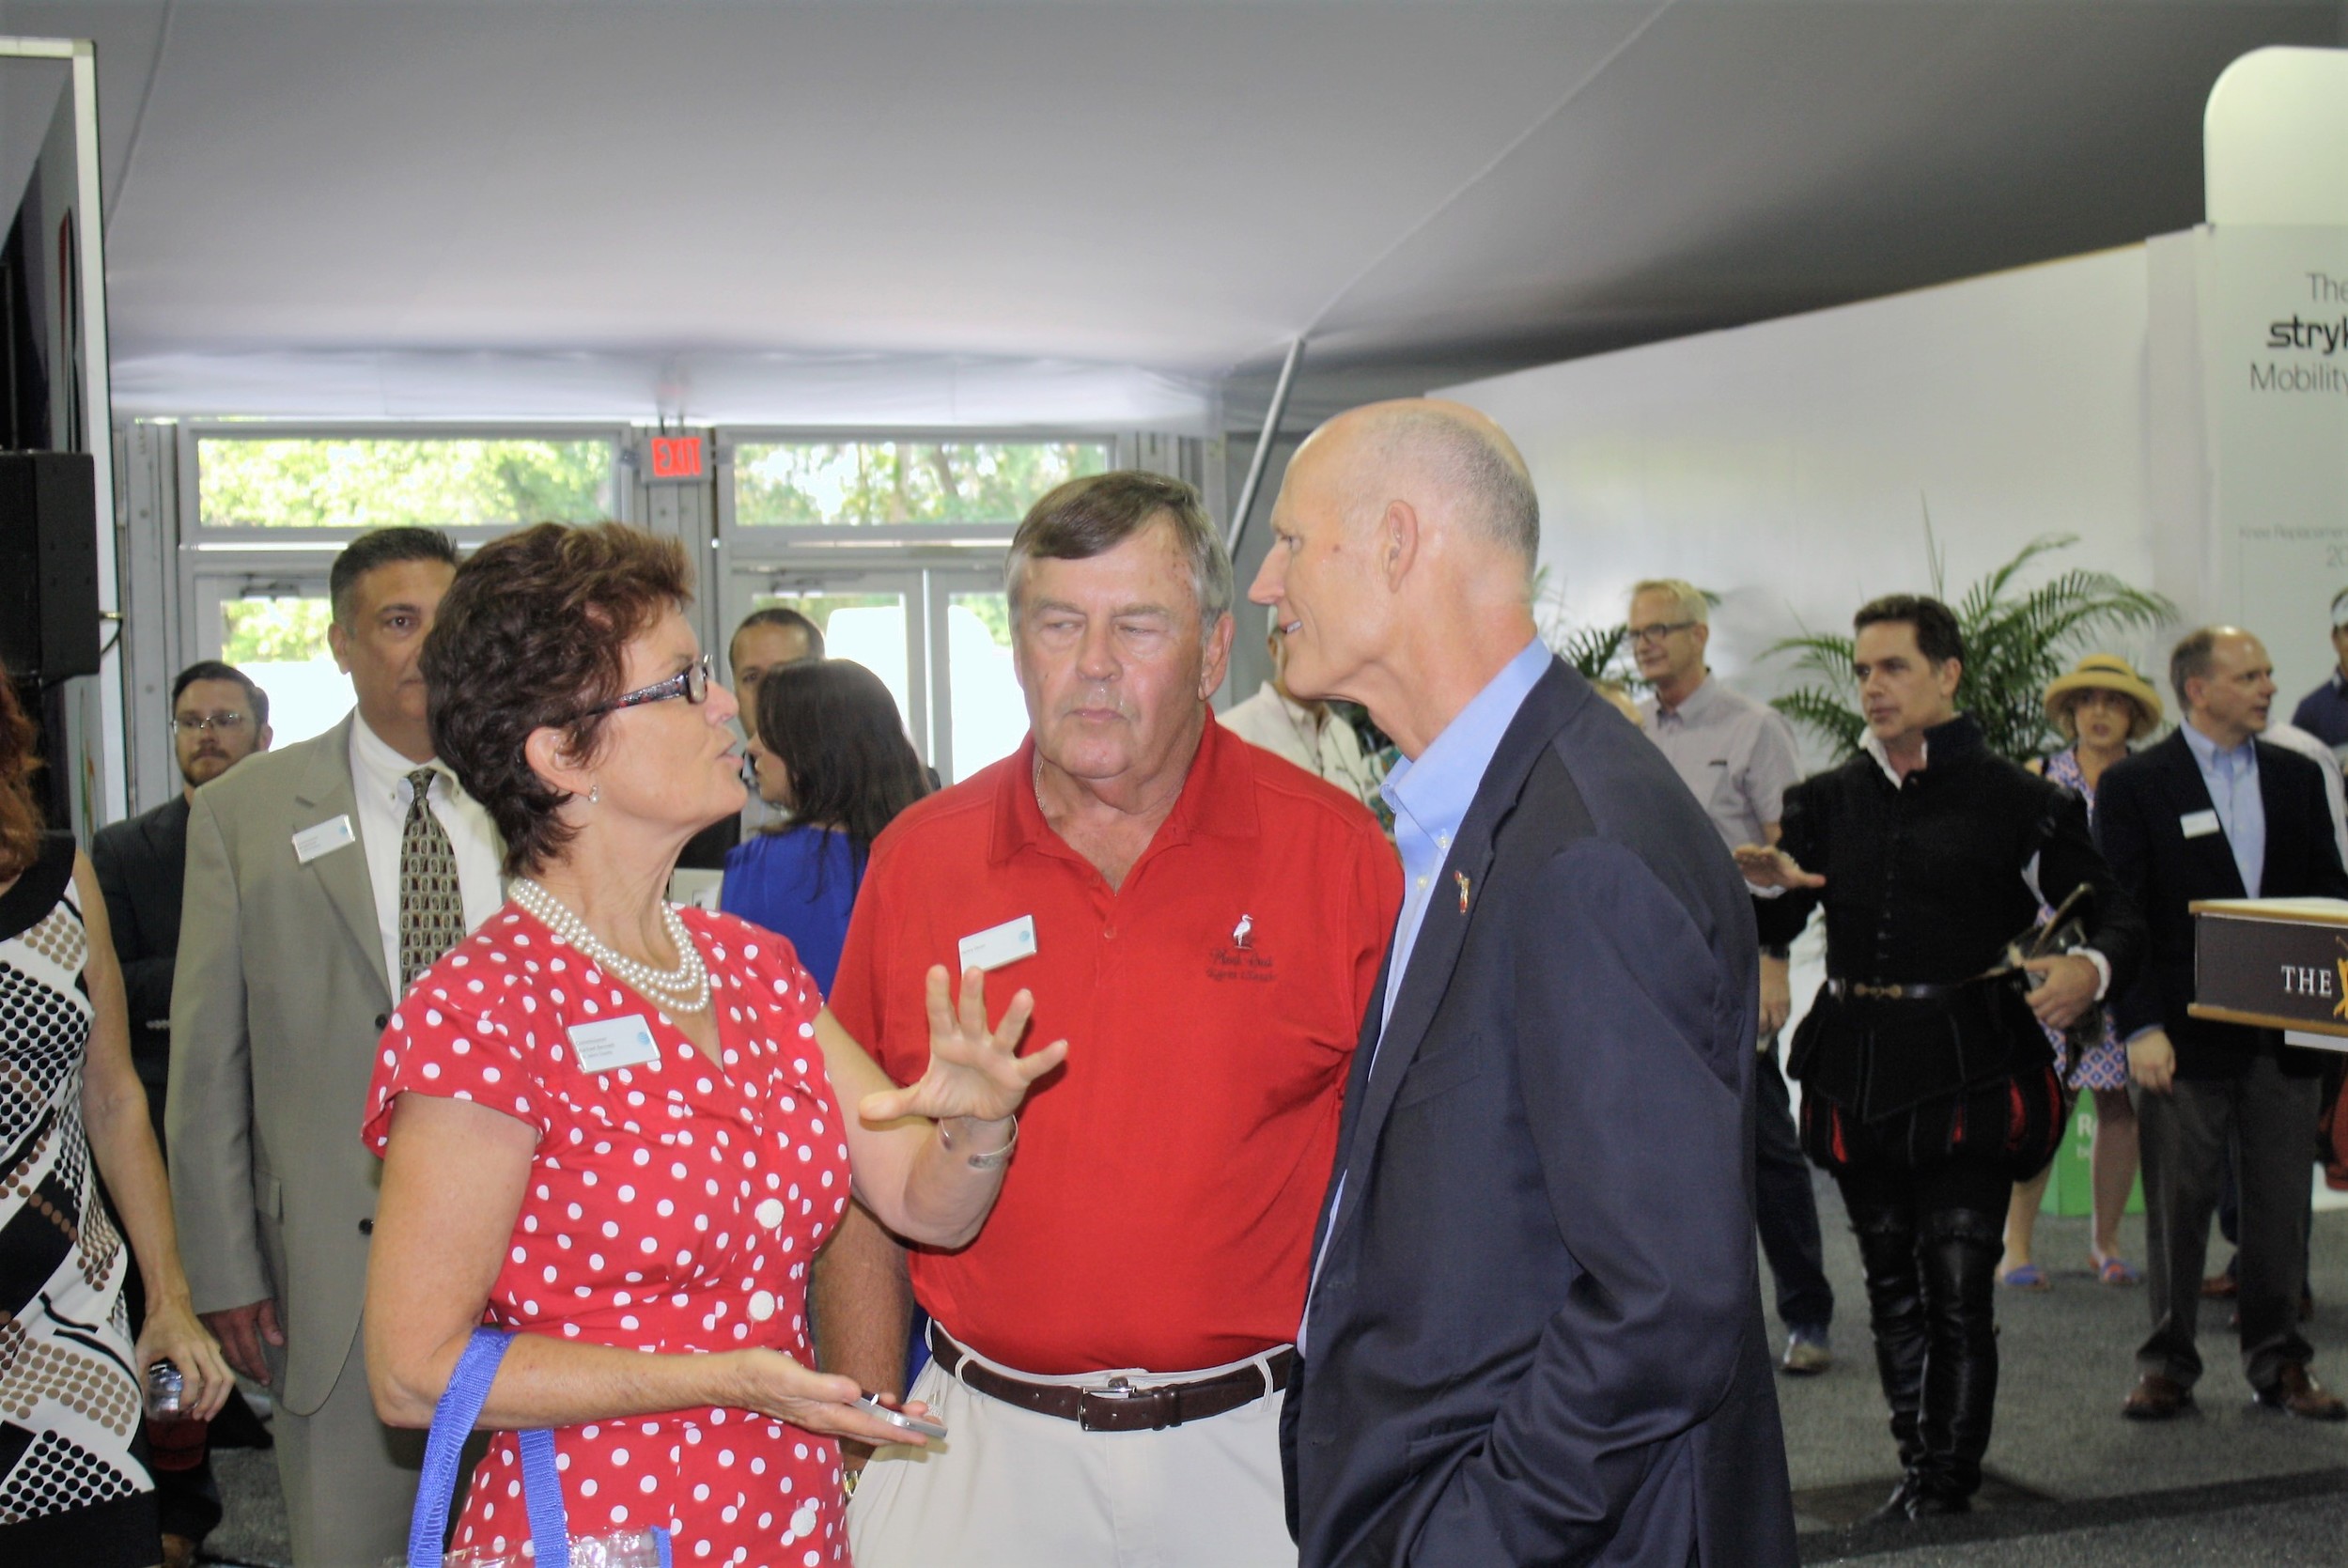 County Commissioner Rachael Bennett and Henry Deen speak with Governor Rick Scott.